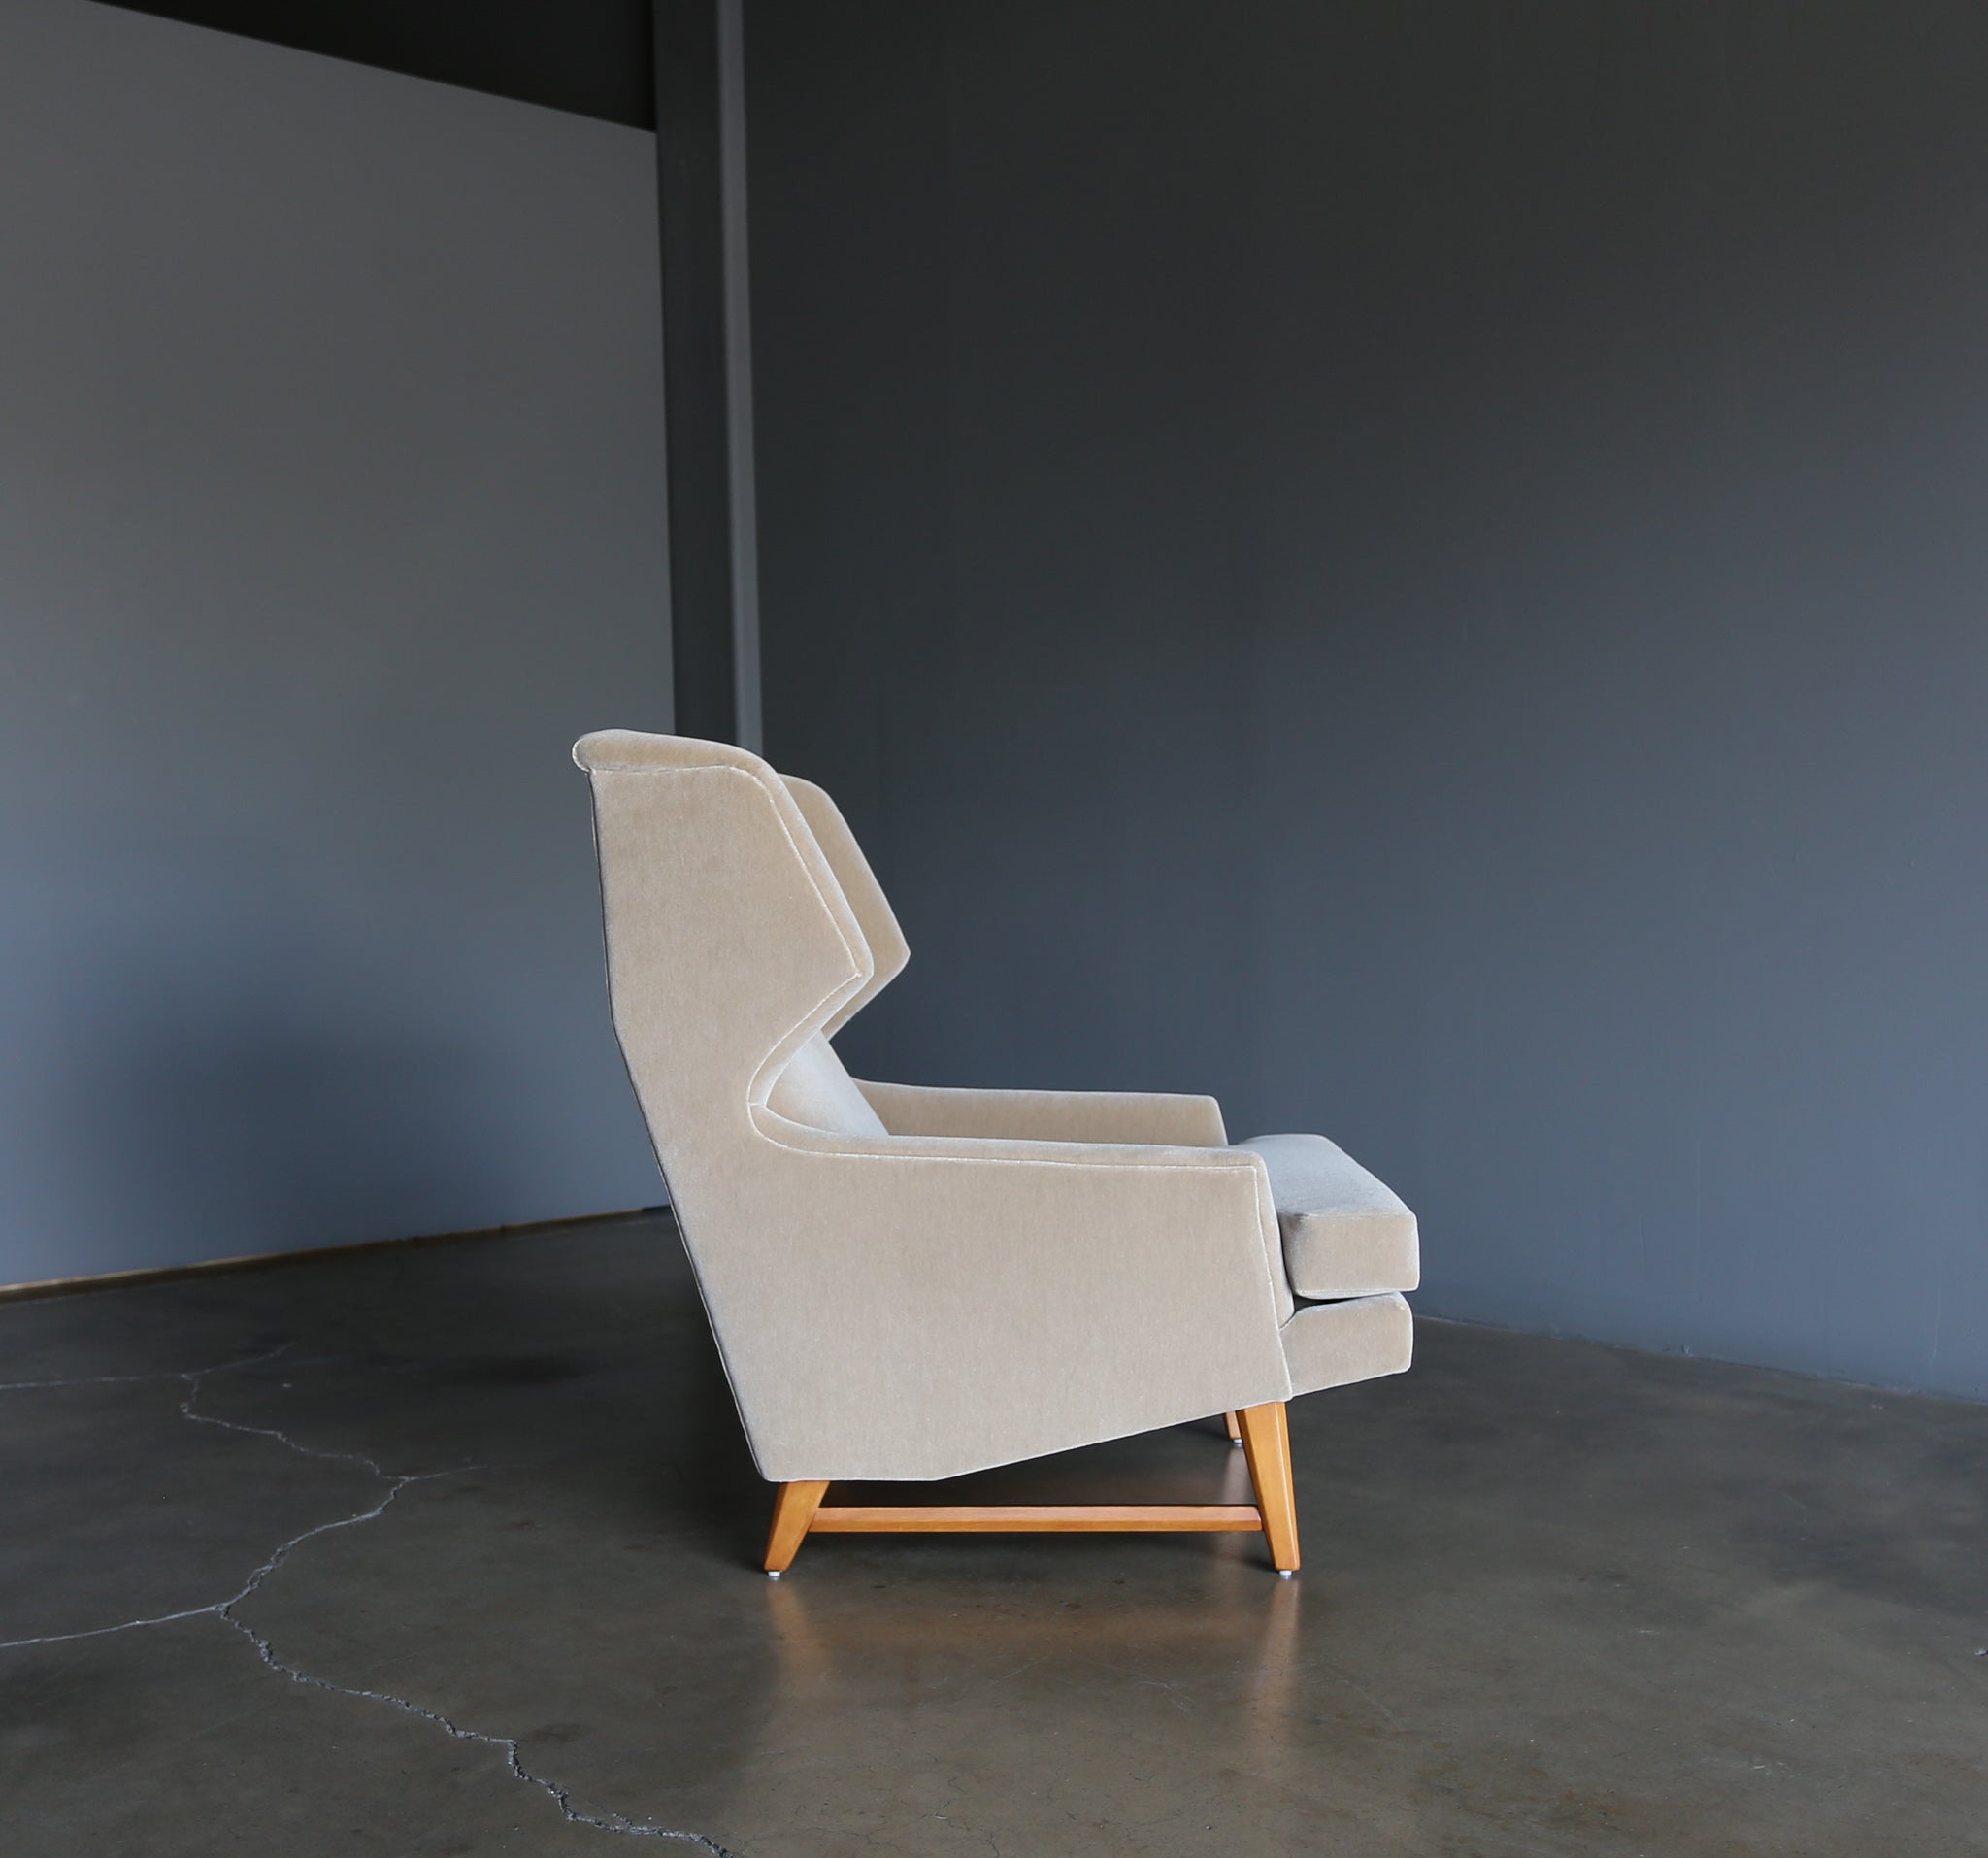 = SOLD = American Design Modernist Wingback Lounge Chairs in Mohair, circa 1955